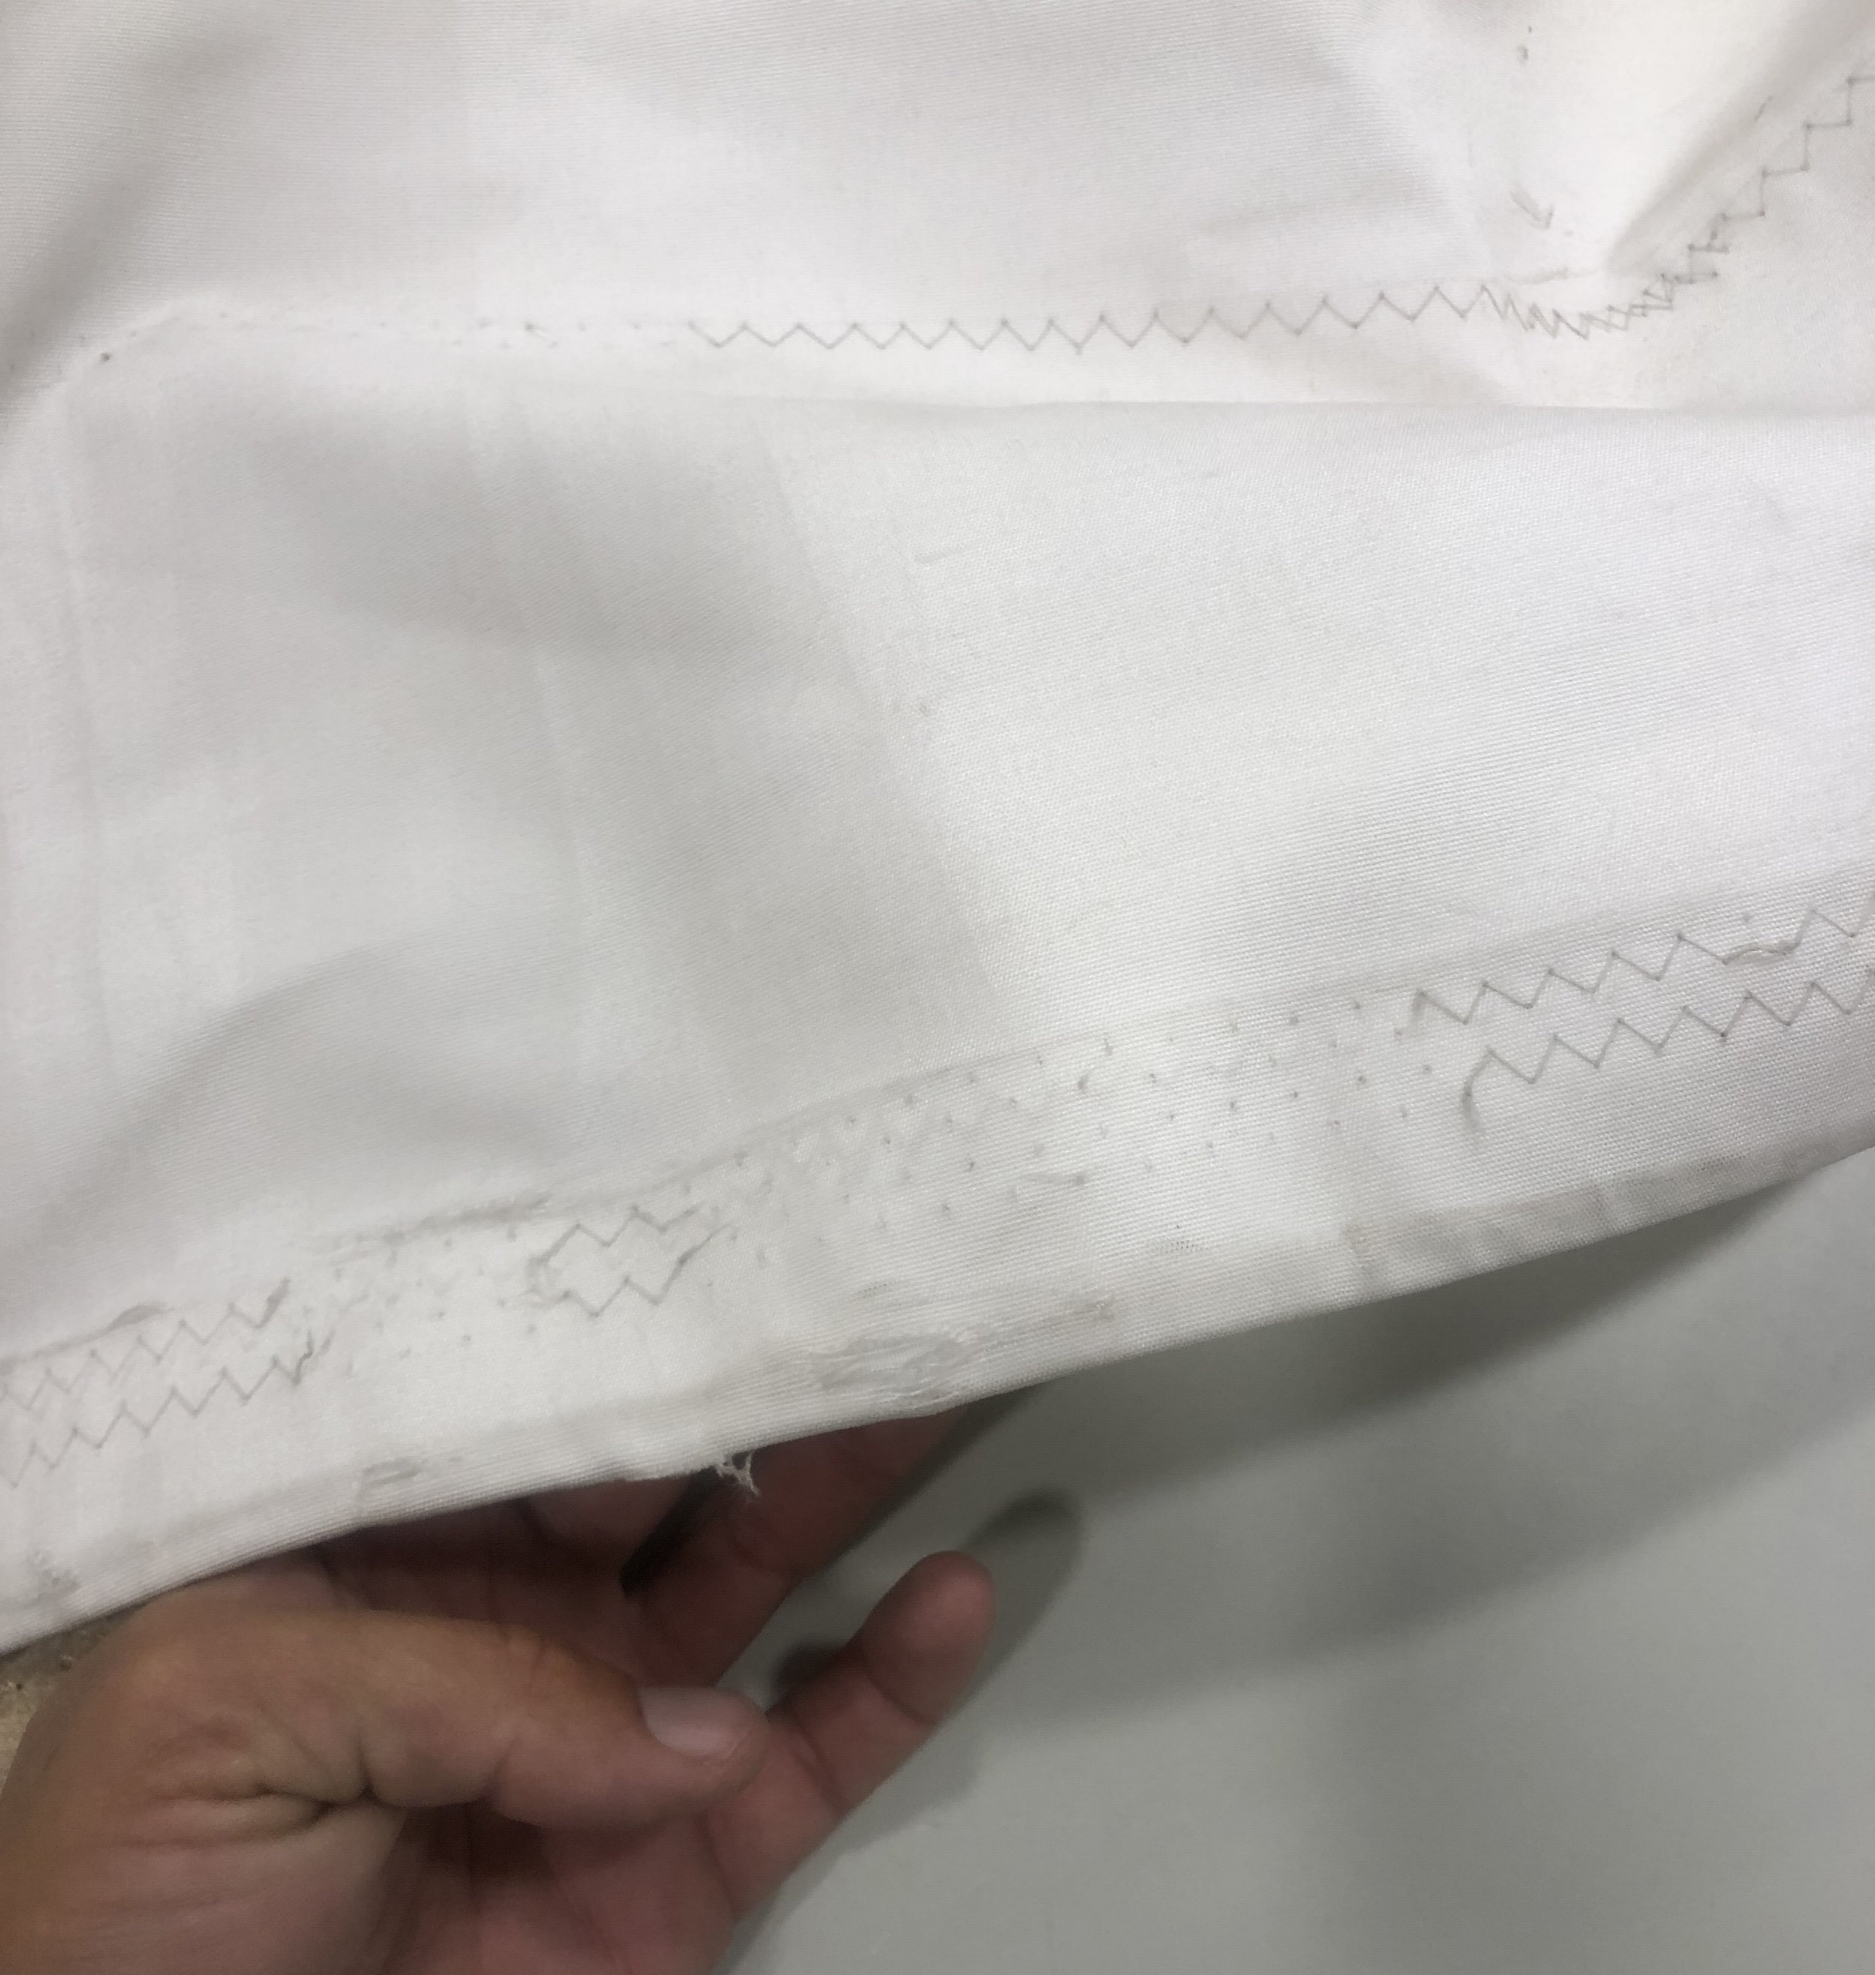 An example of chafe found in an inspection. A chafe patch will be applied to keep the sail from getting ripped in the future. If this small damage was not found, the sail could have kept getting damaged to the point of failure.